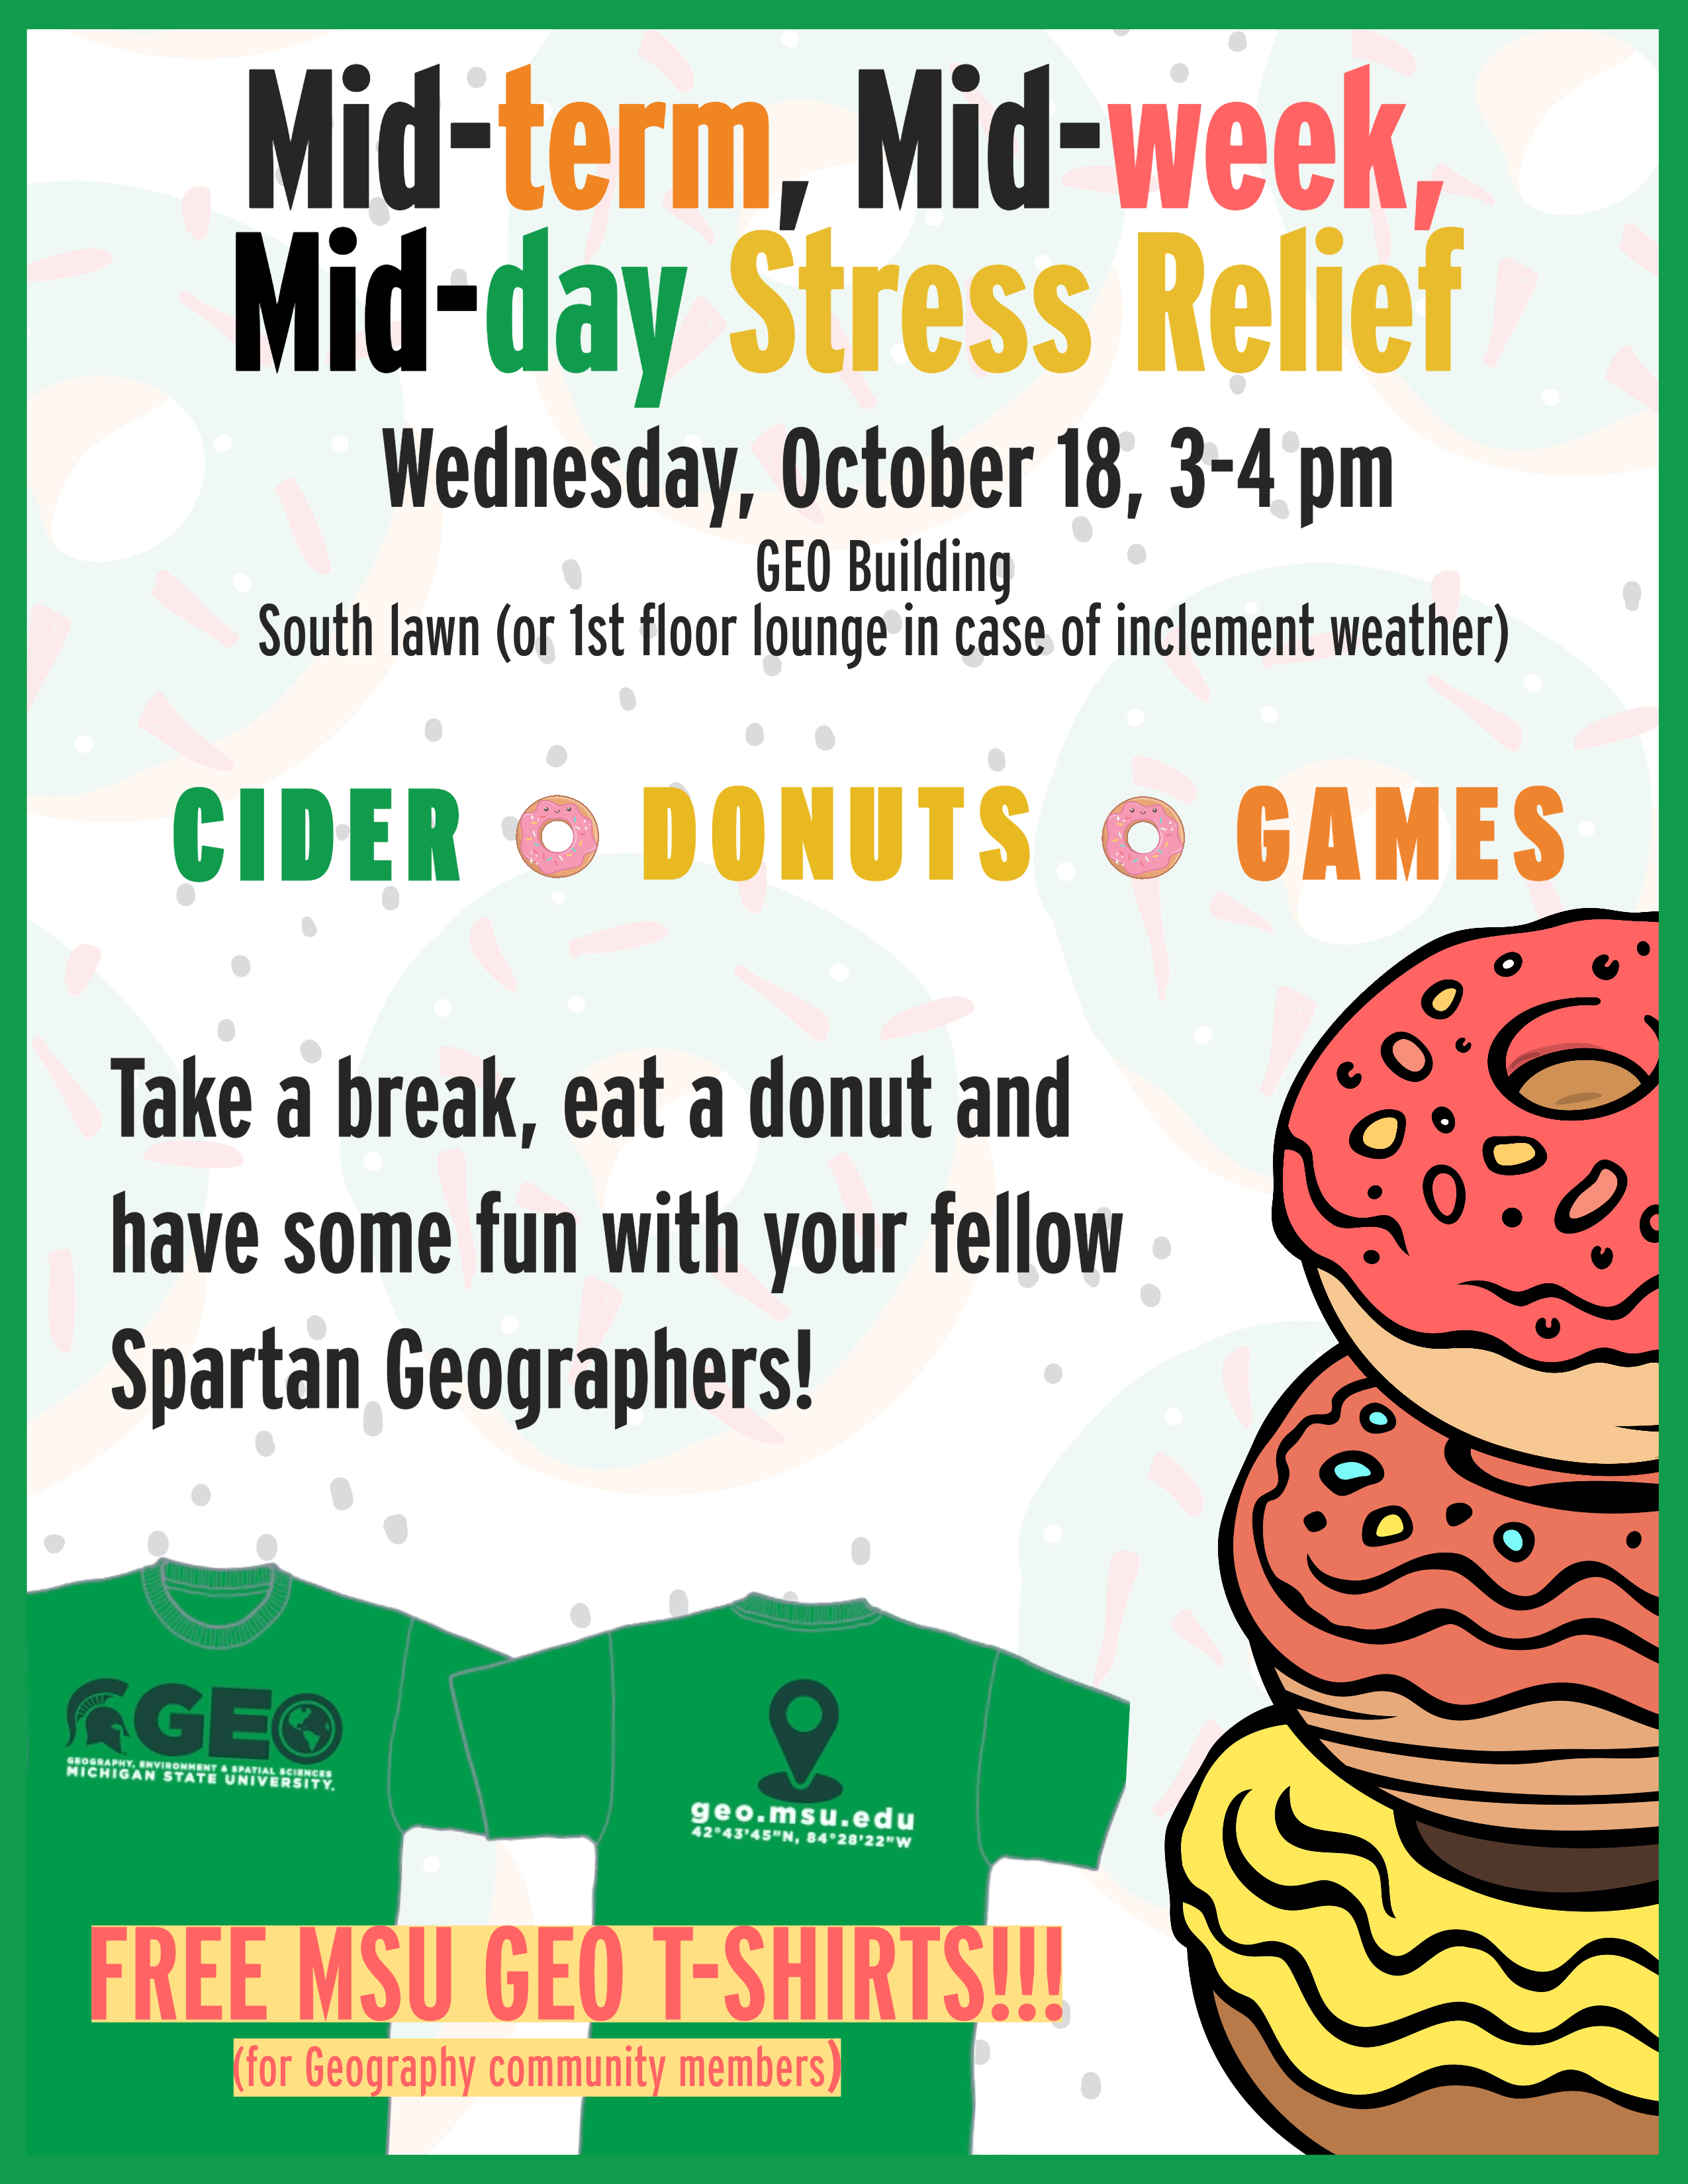 Md-term stress relief event flyer